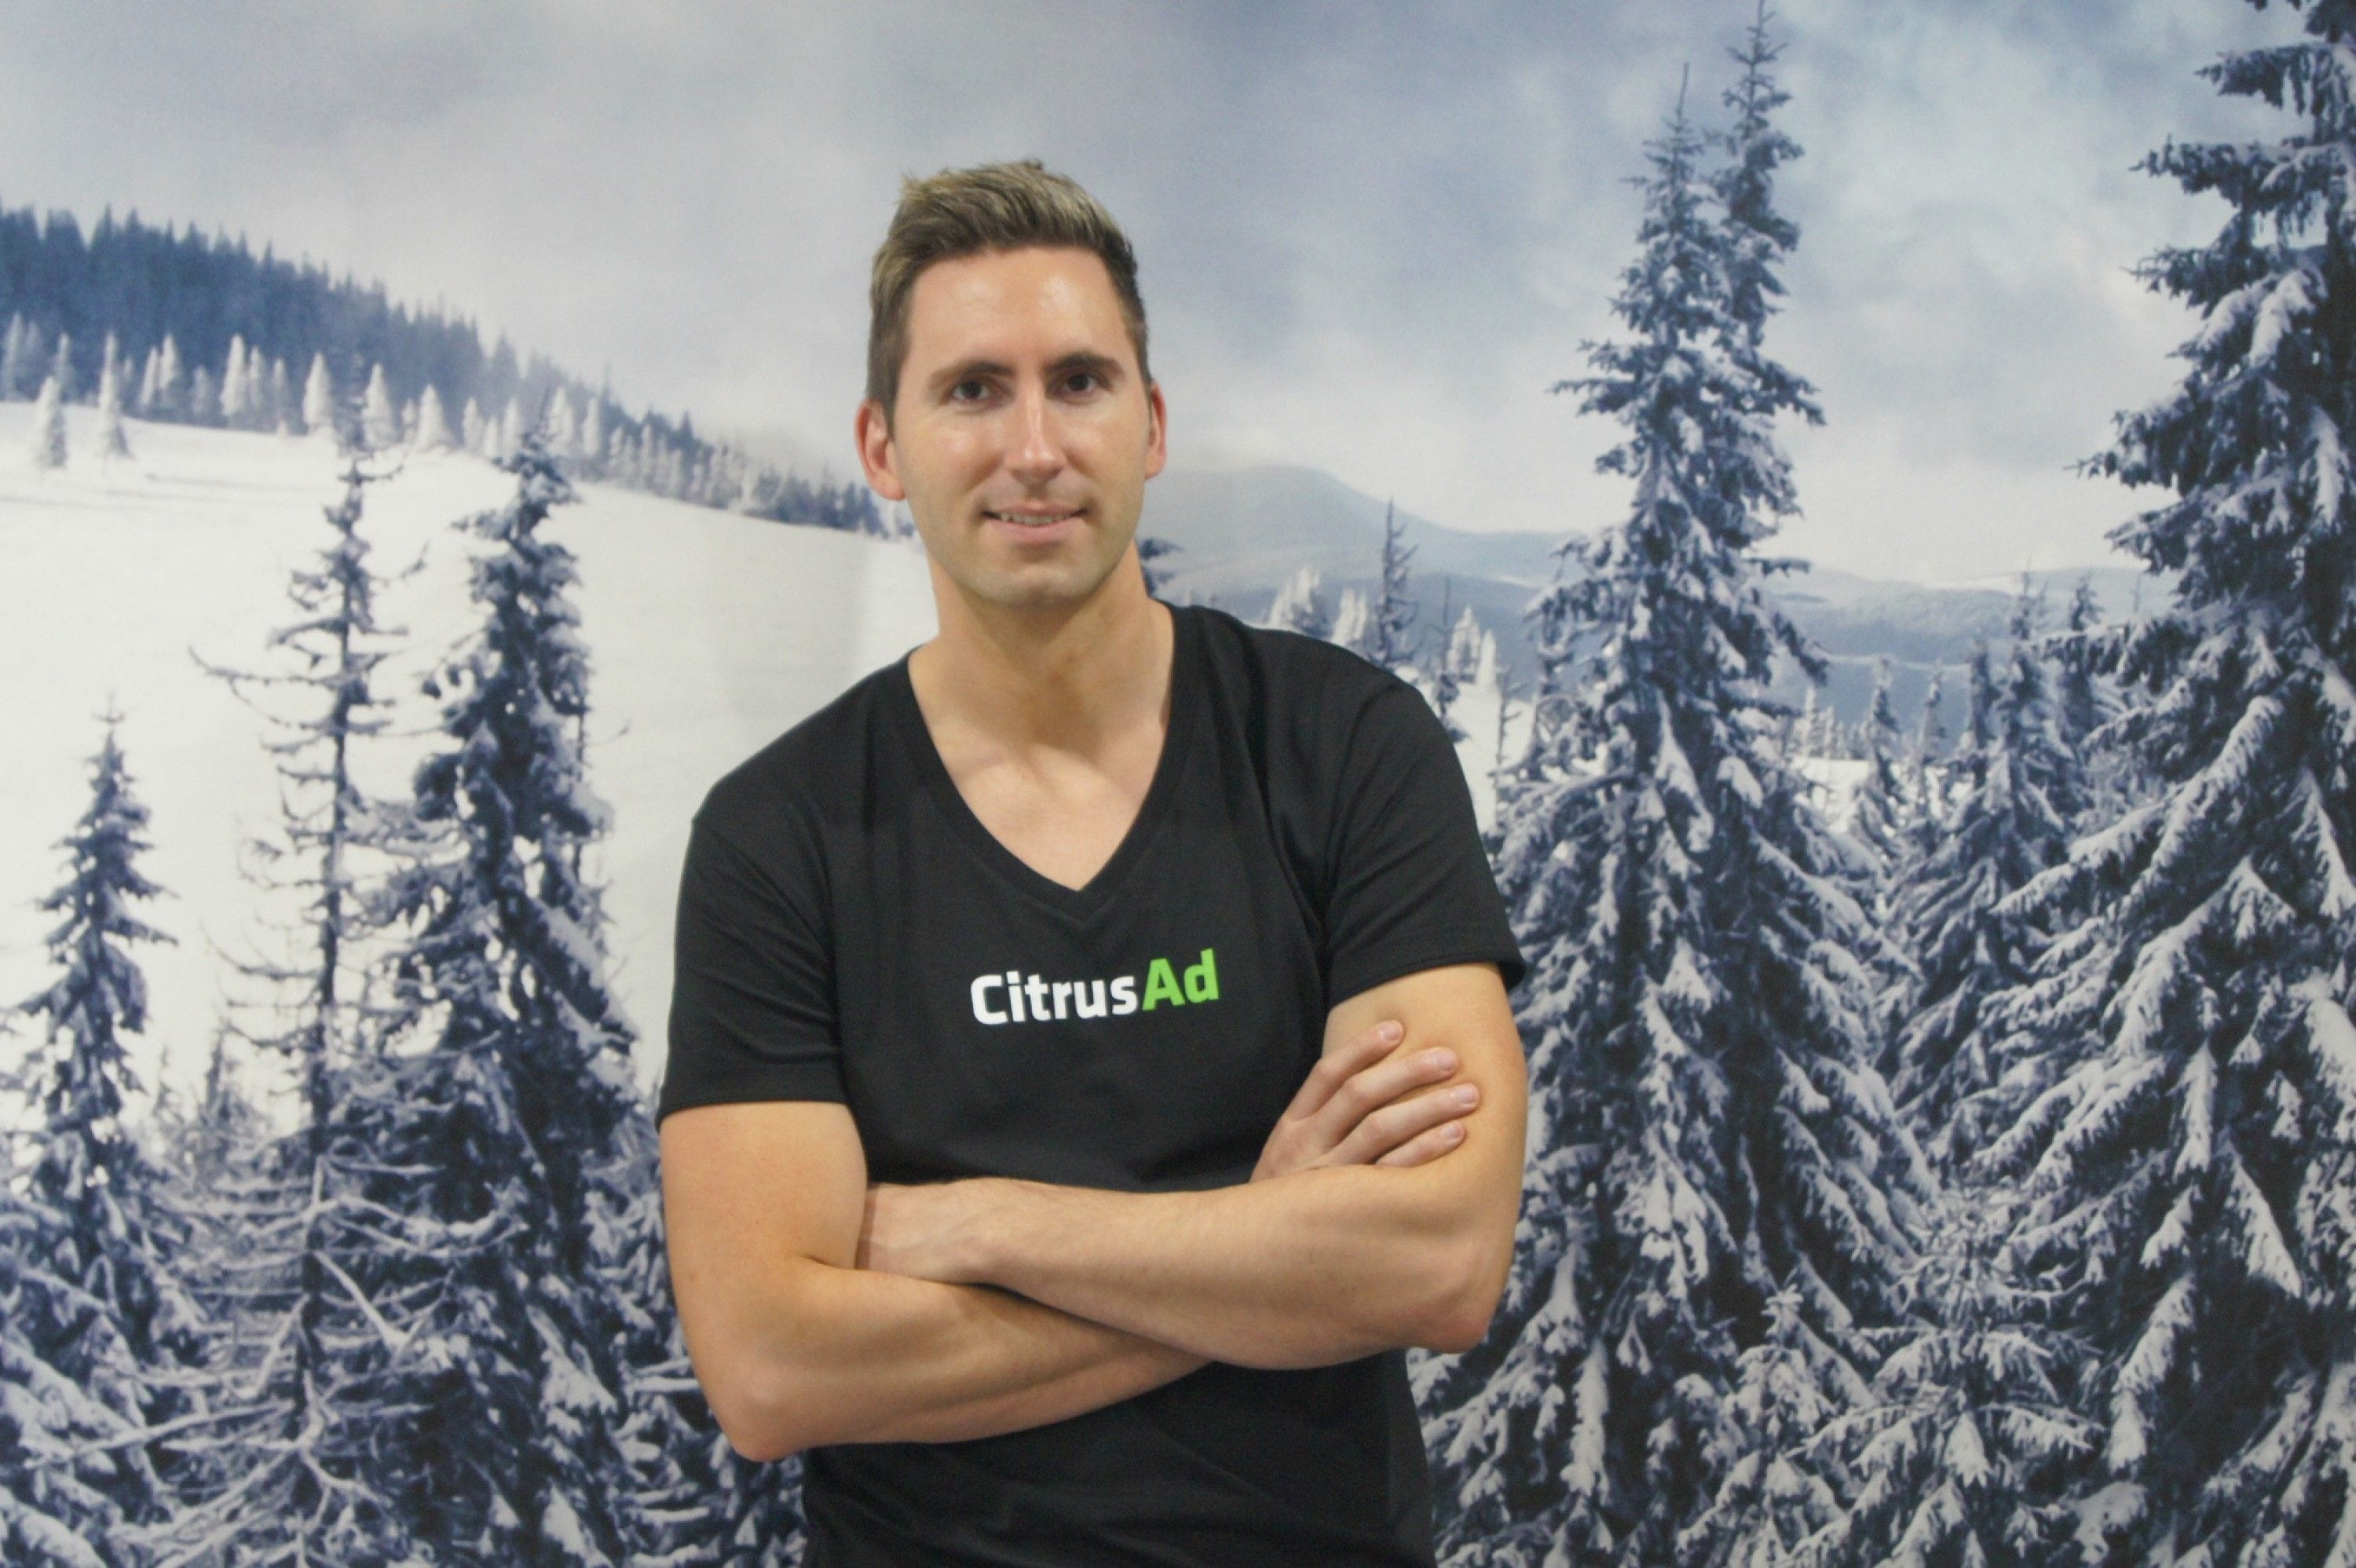 CitrusAd doubles revenue during COVID-19 online shopping boom